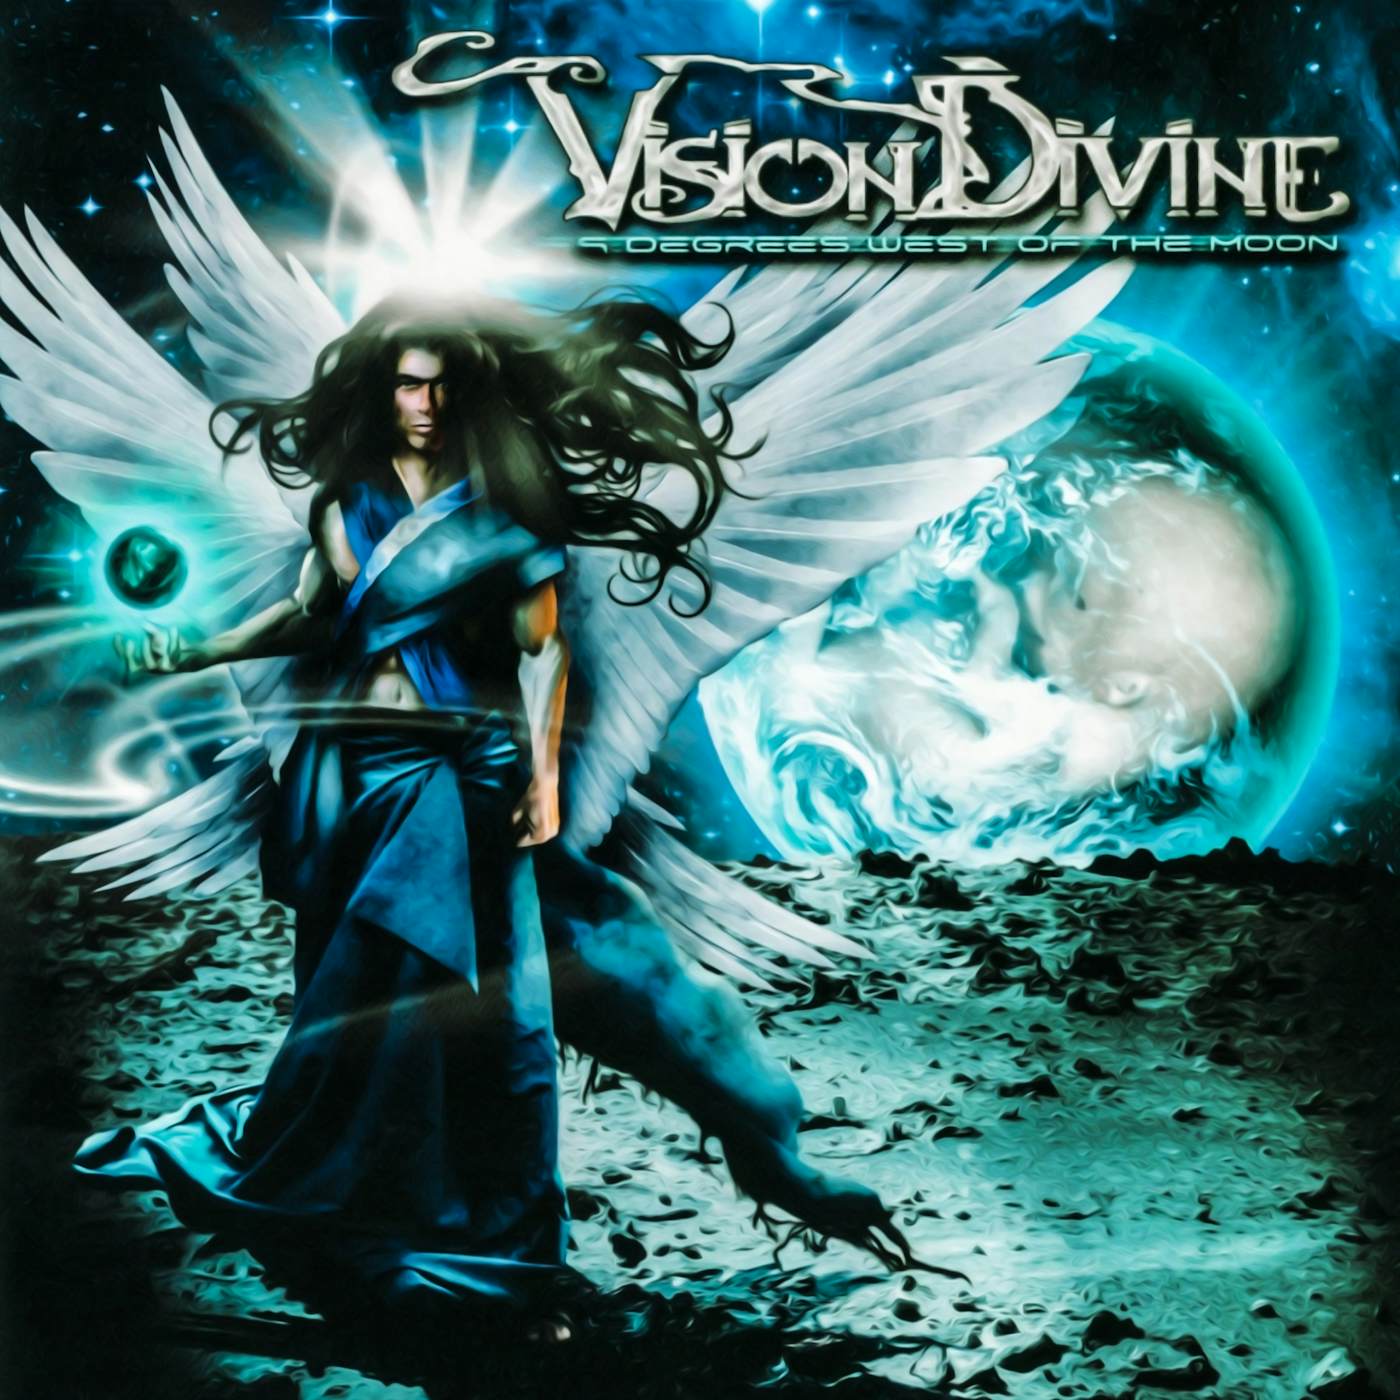 Vision Divine 9 Degrees West Of The Moon CD